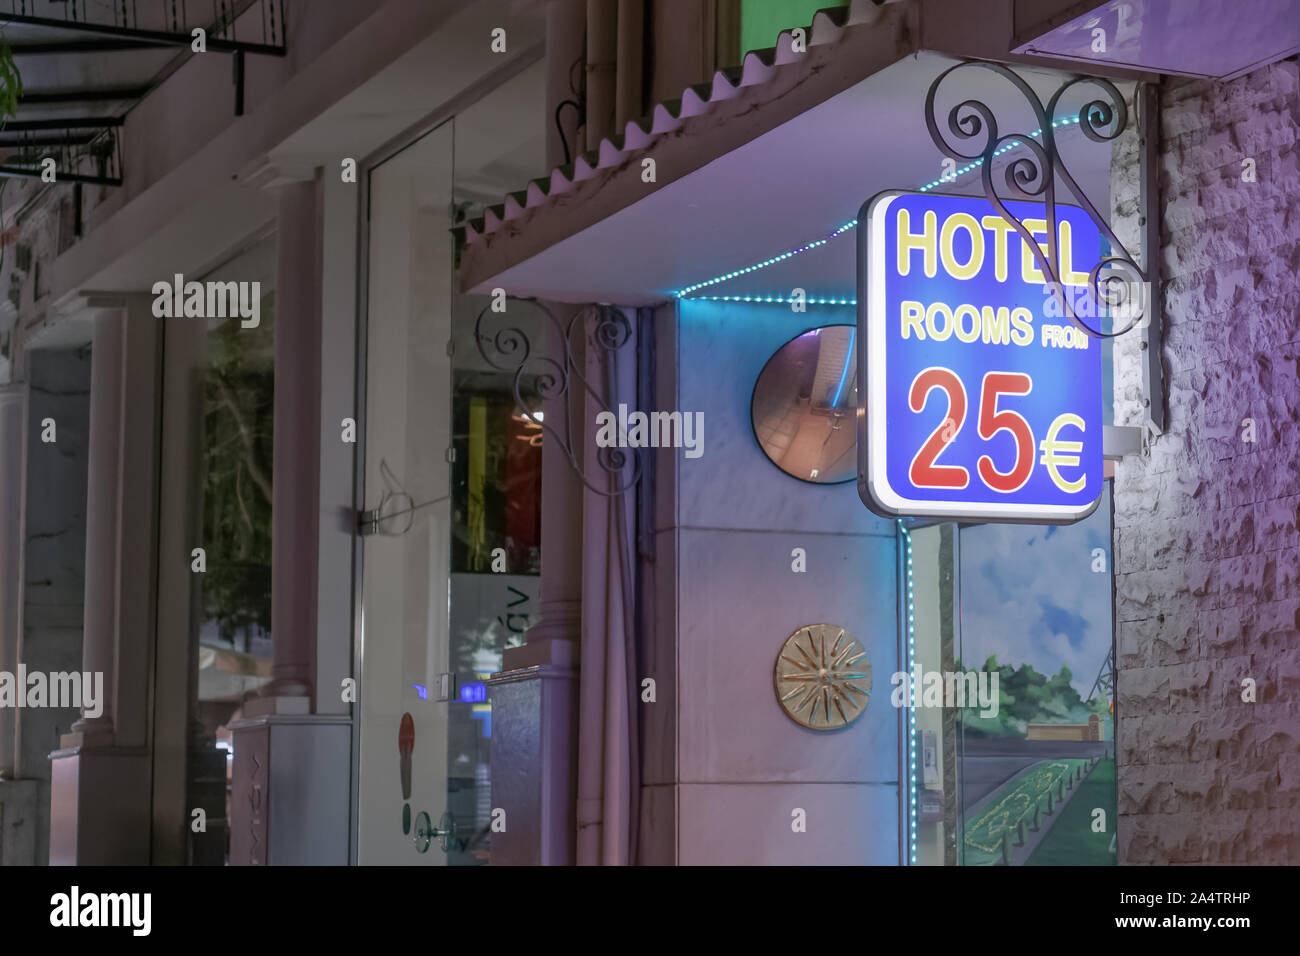 Nightlife hotel entrance sign with rooms price. Illuminated view of bright sign with displaying message of hotel rooms from 25 euros in Thessaloniki. Stock Photo